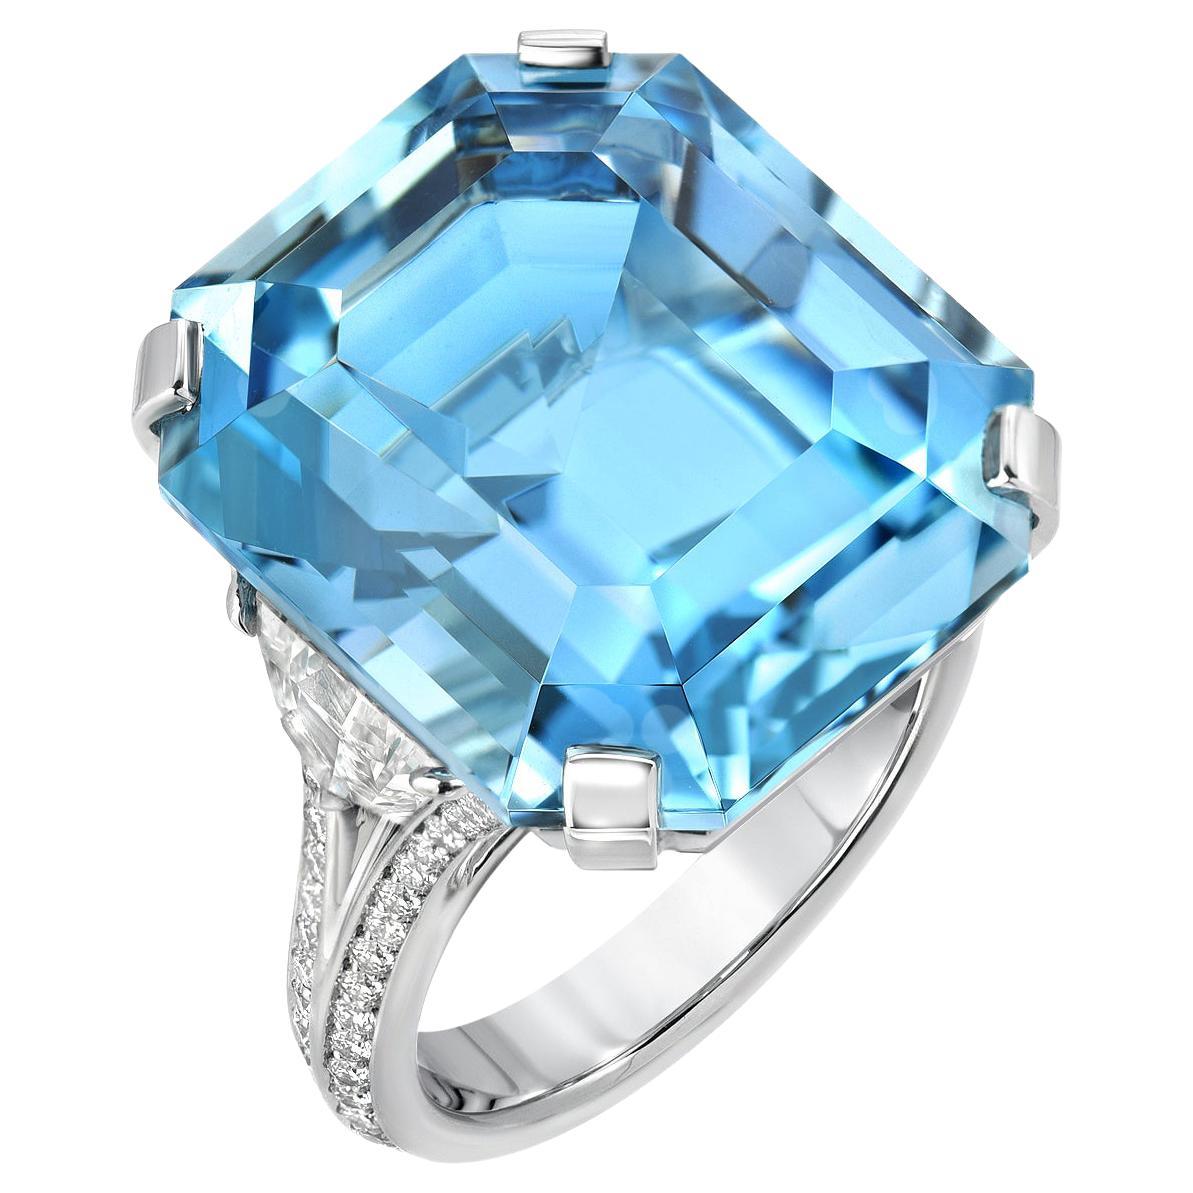 This incredible 20.37 carat natural Brazilian Aquamarine emerald-cut platinum ring, is flanked by a pair of F/VS2 Epaulet diamonds weighing a total of 0.96 carats, and surrounded by a total of 0.41 carat round brilliant diamonds.
Size 6. Resizing is